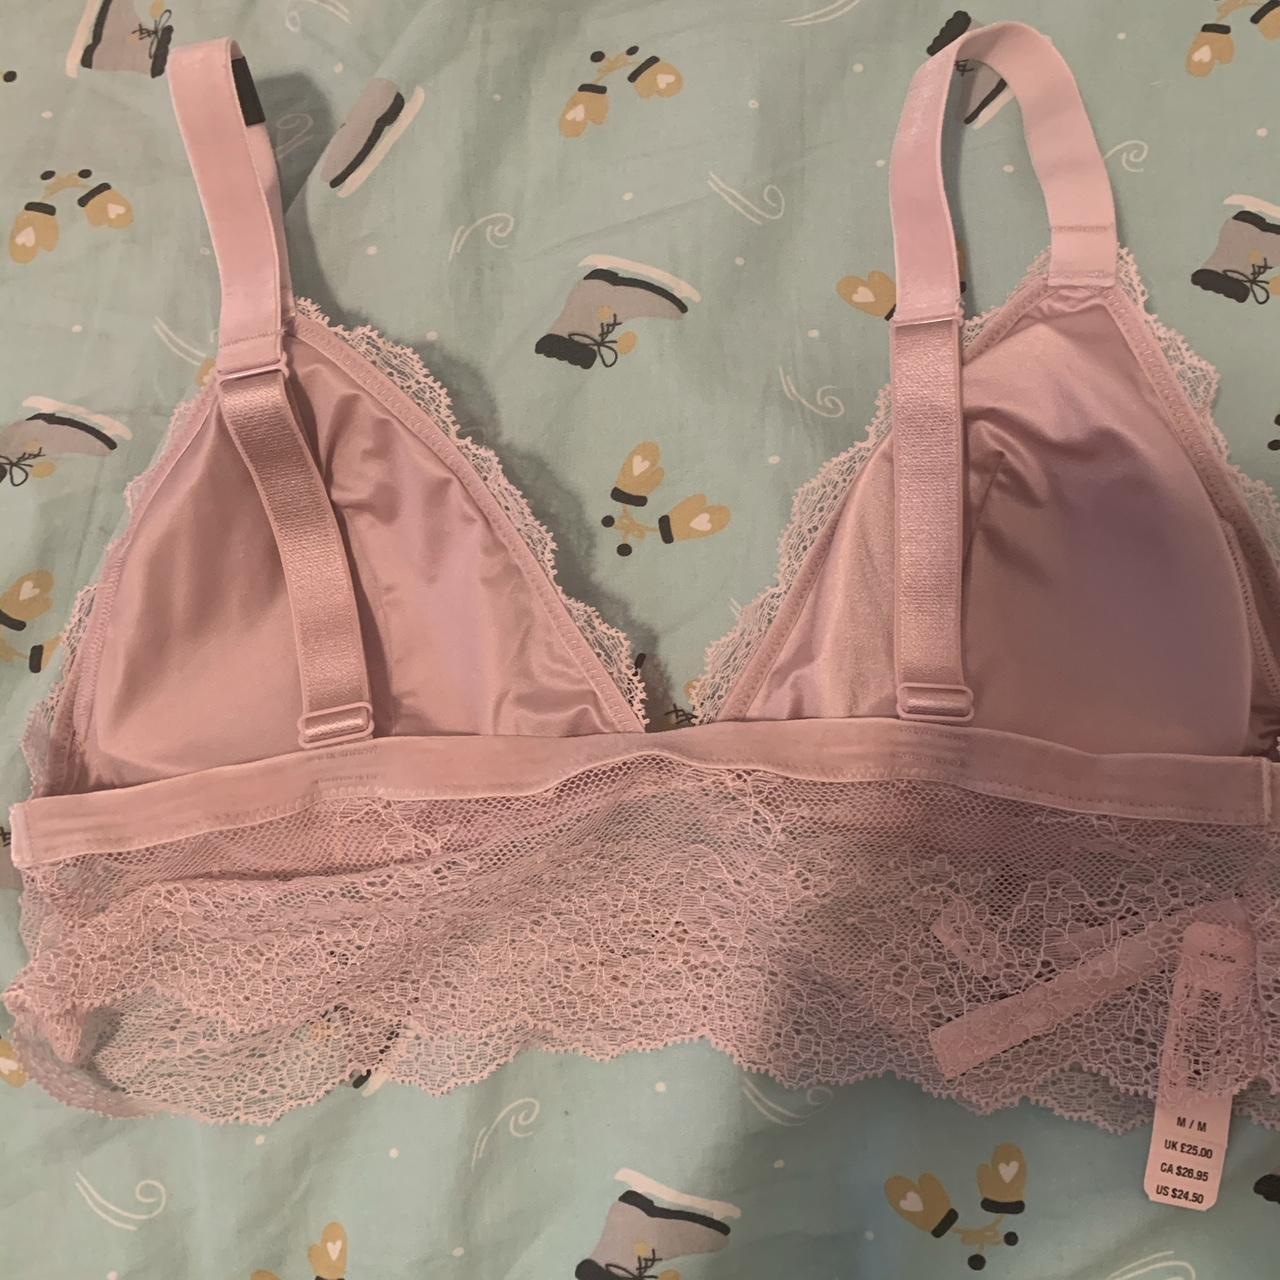 BNWT hot pink lace bra from PINK by victoria's - Depop